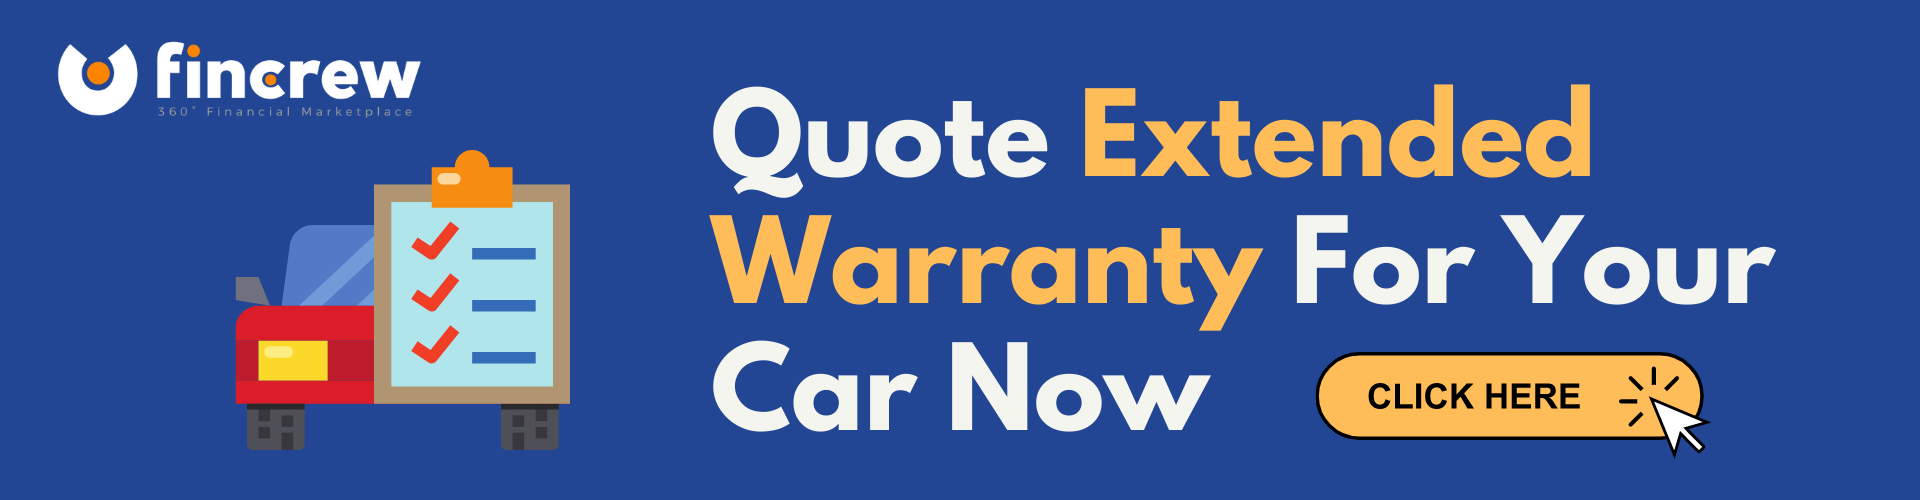 Quote-Extended-Warranty-For-Your-Car-Now